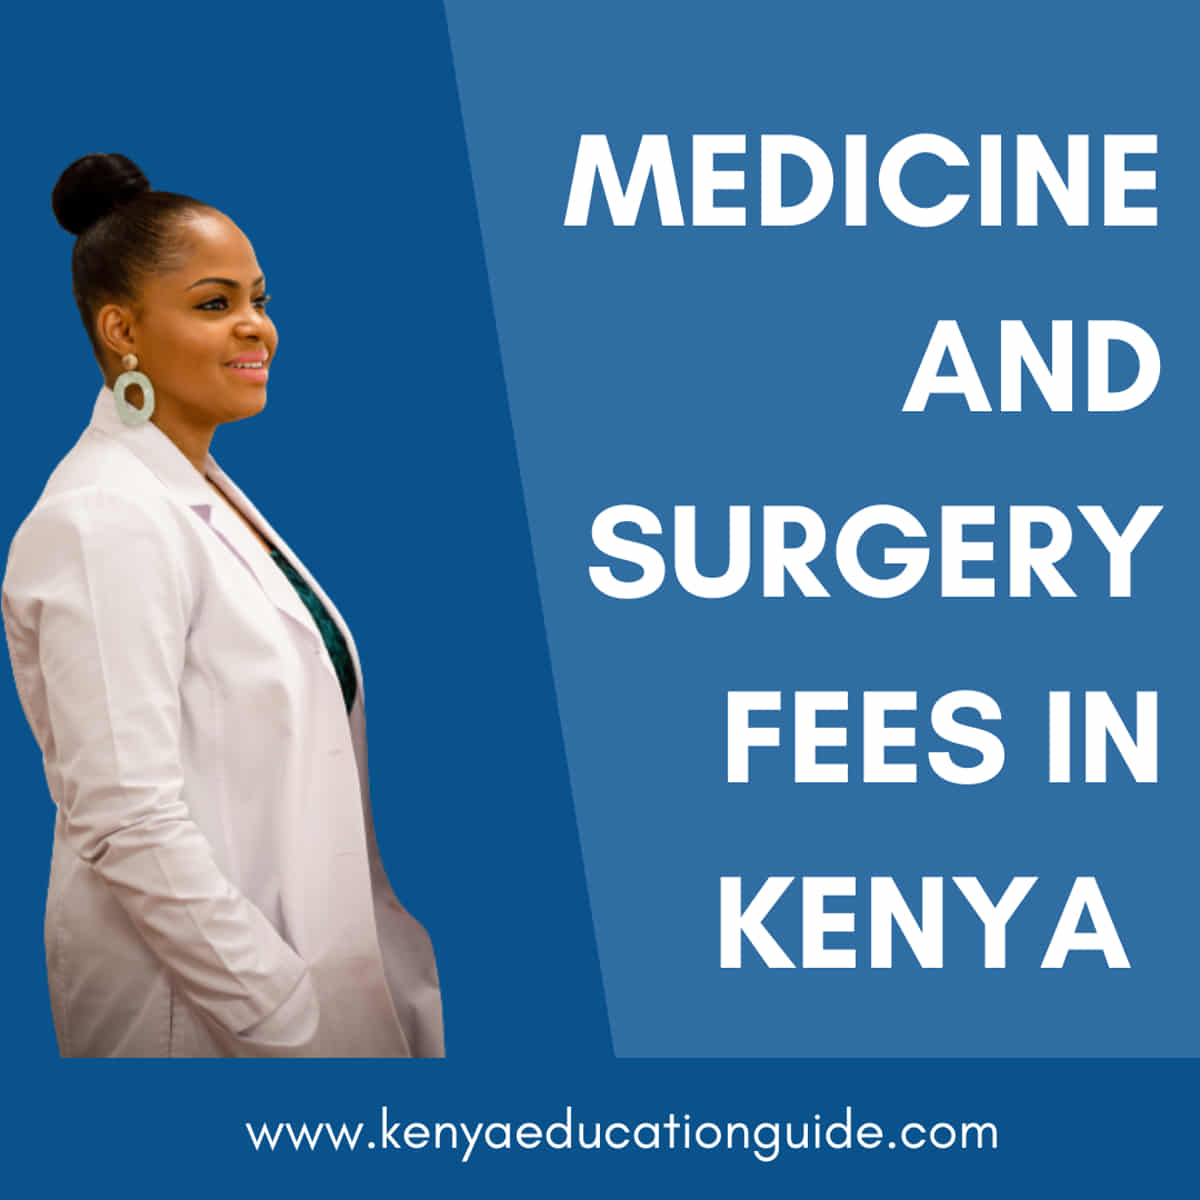 Medicine and surgery fees